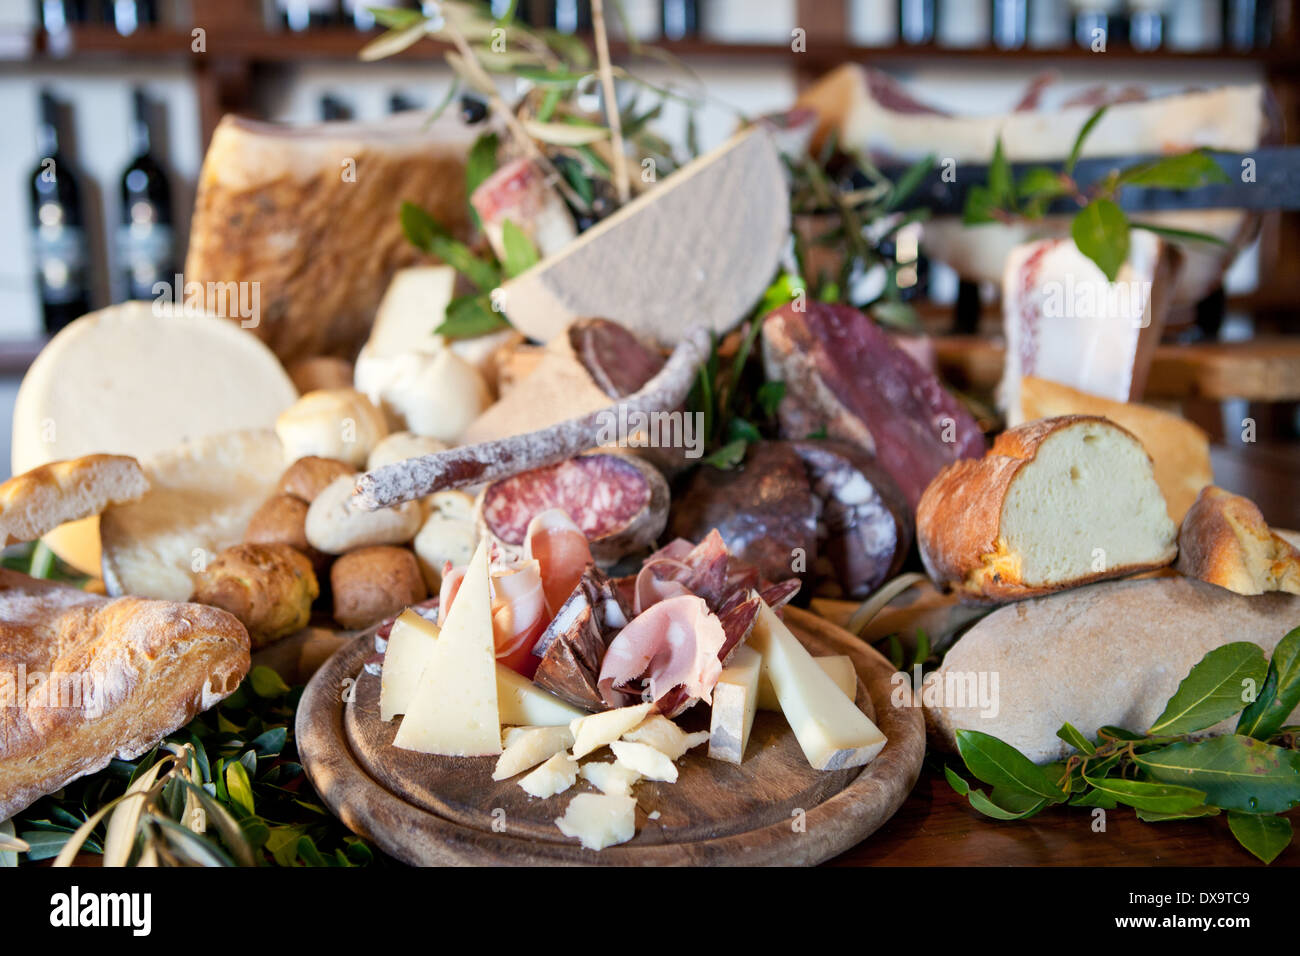 cold cuts, salami, homemade bread and tuscany cheese Stock Photo